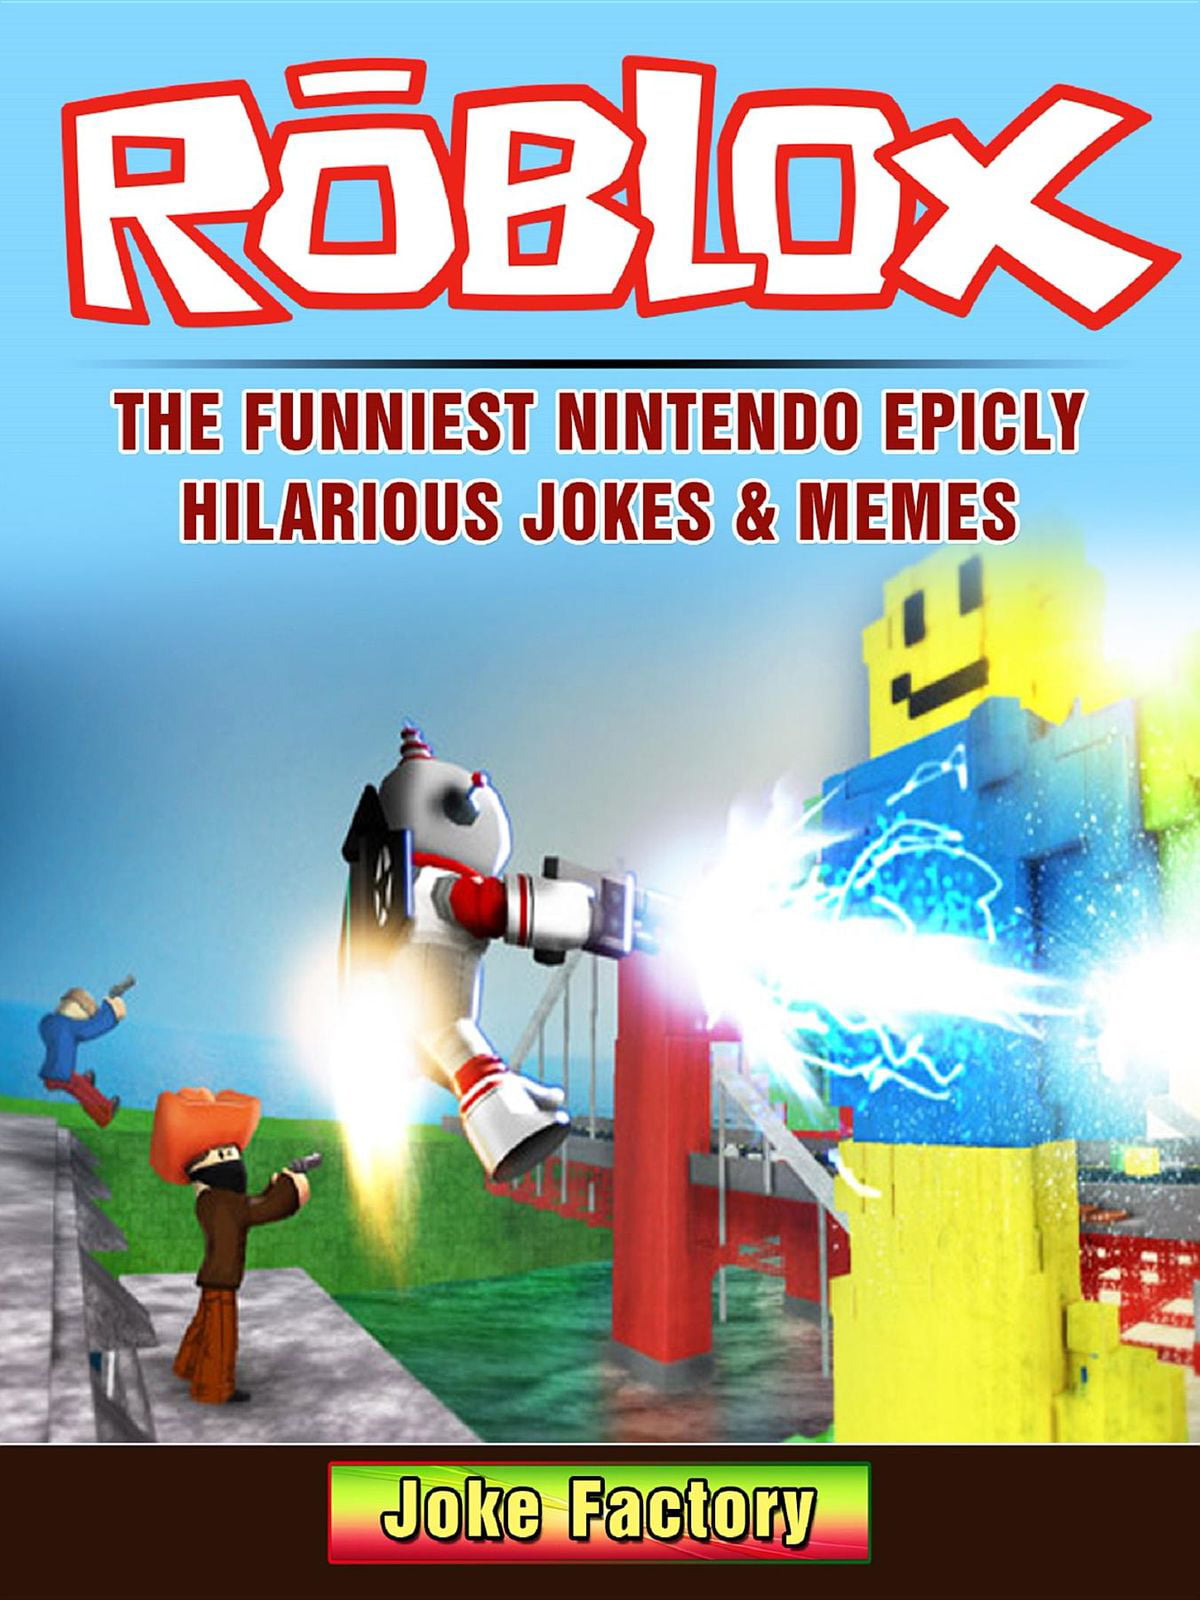 Roblox The Funniest Nintendo Epicly Hilarious Jokes Memes Ebook - 10 awesome roblox outfits based on memes clean for kids